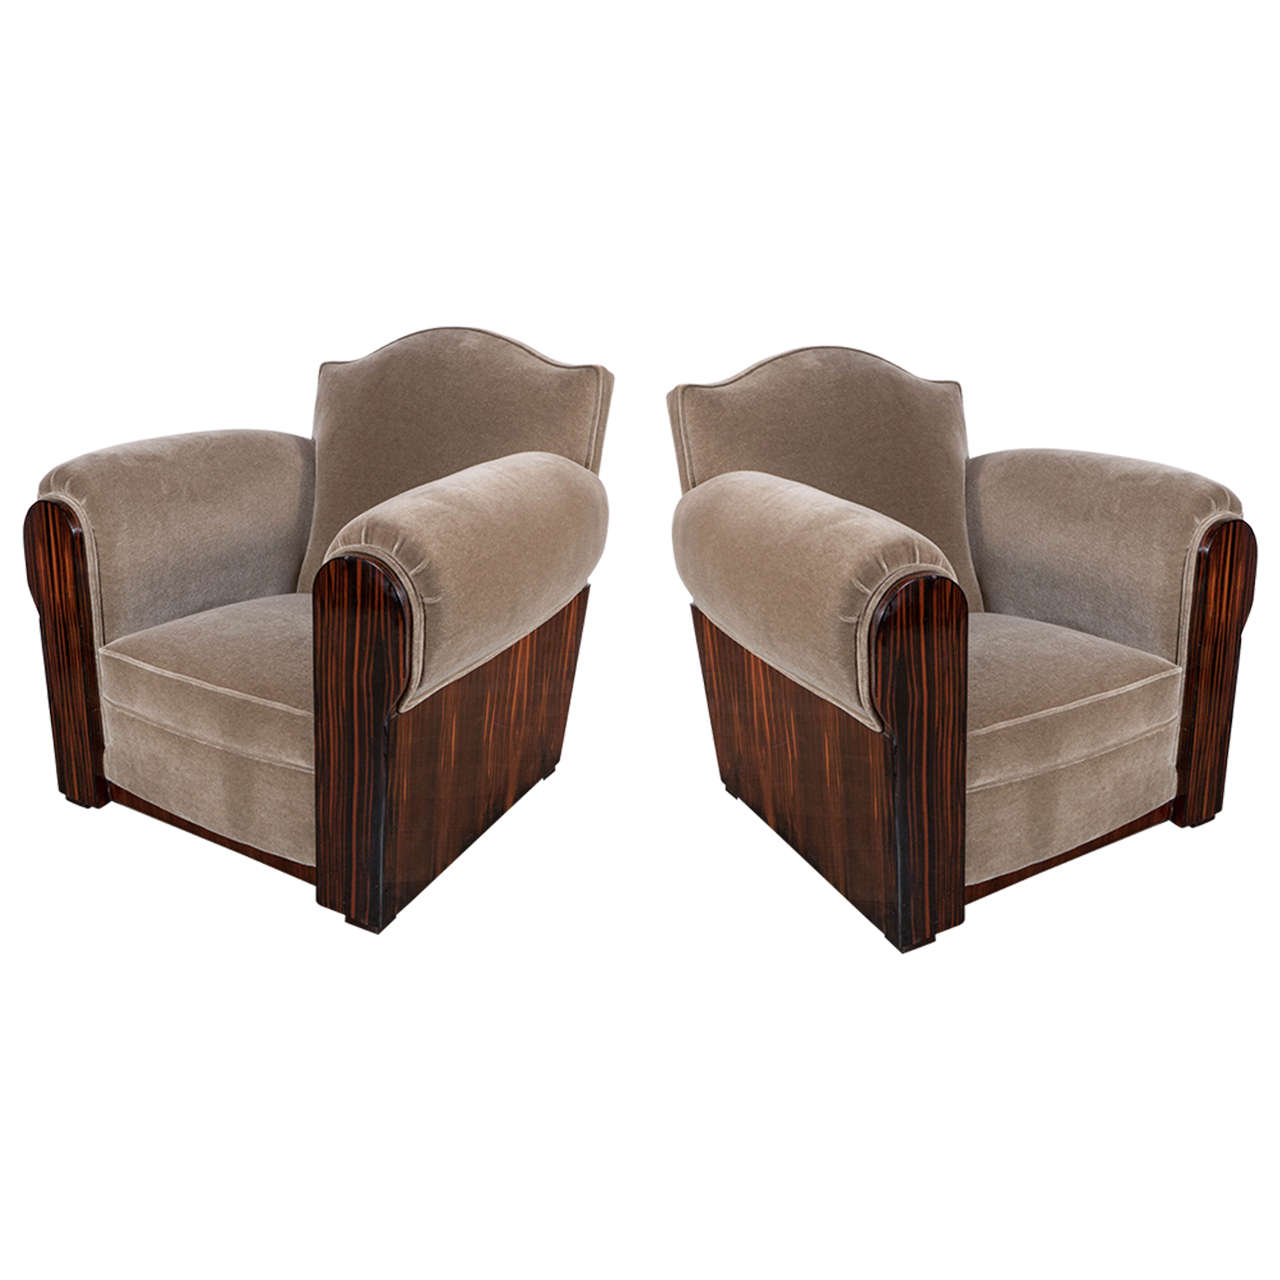 Magnificent Pair of Art Deco Cubist Style Club Chairs with Macassar Detailing